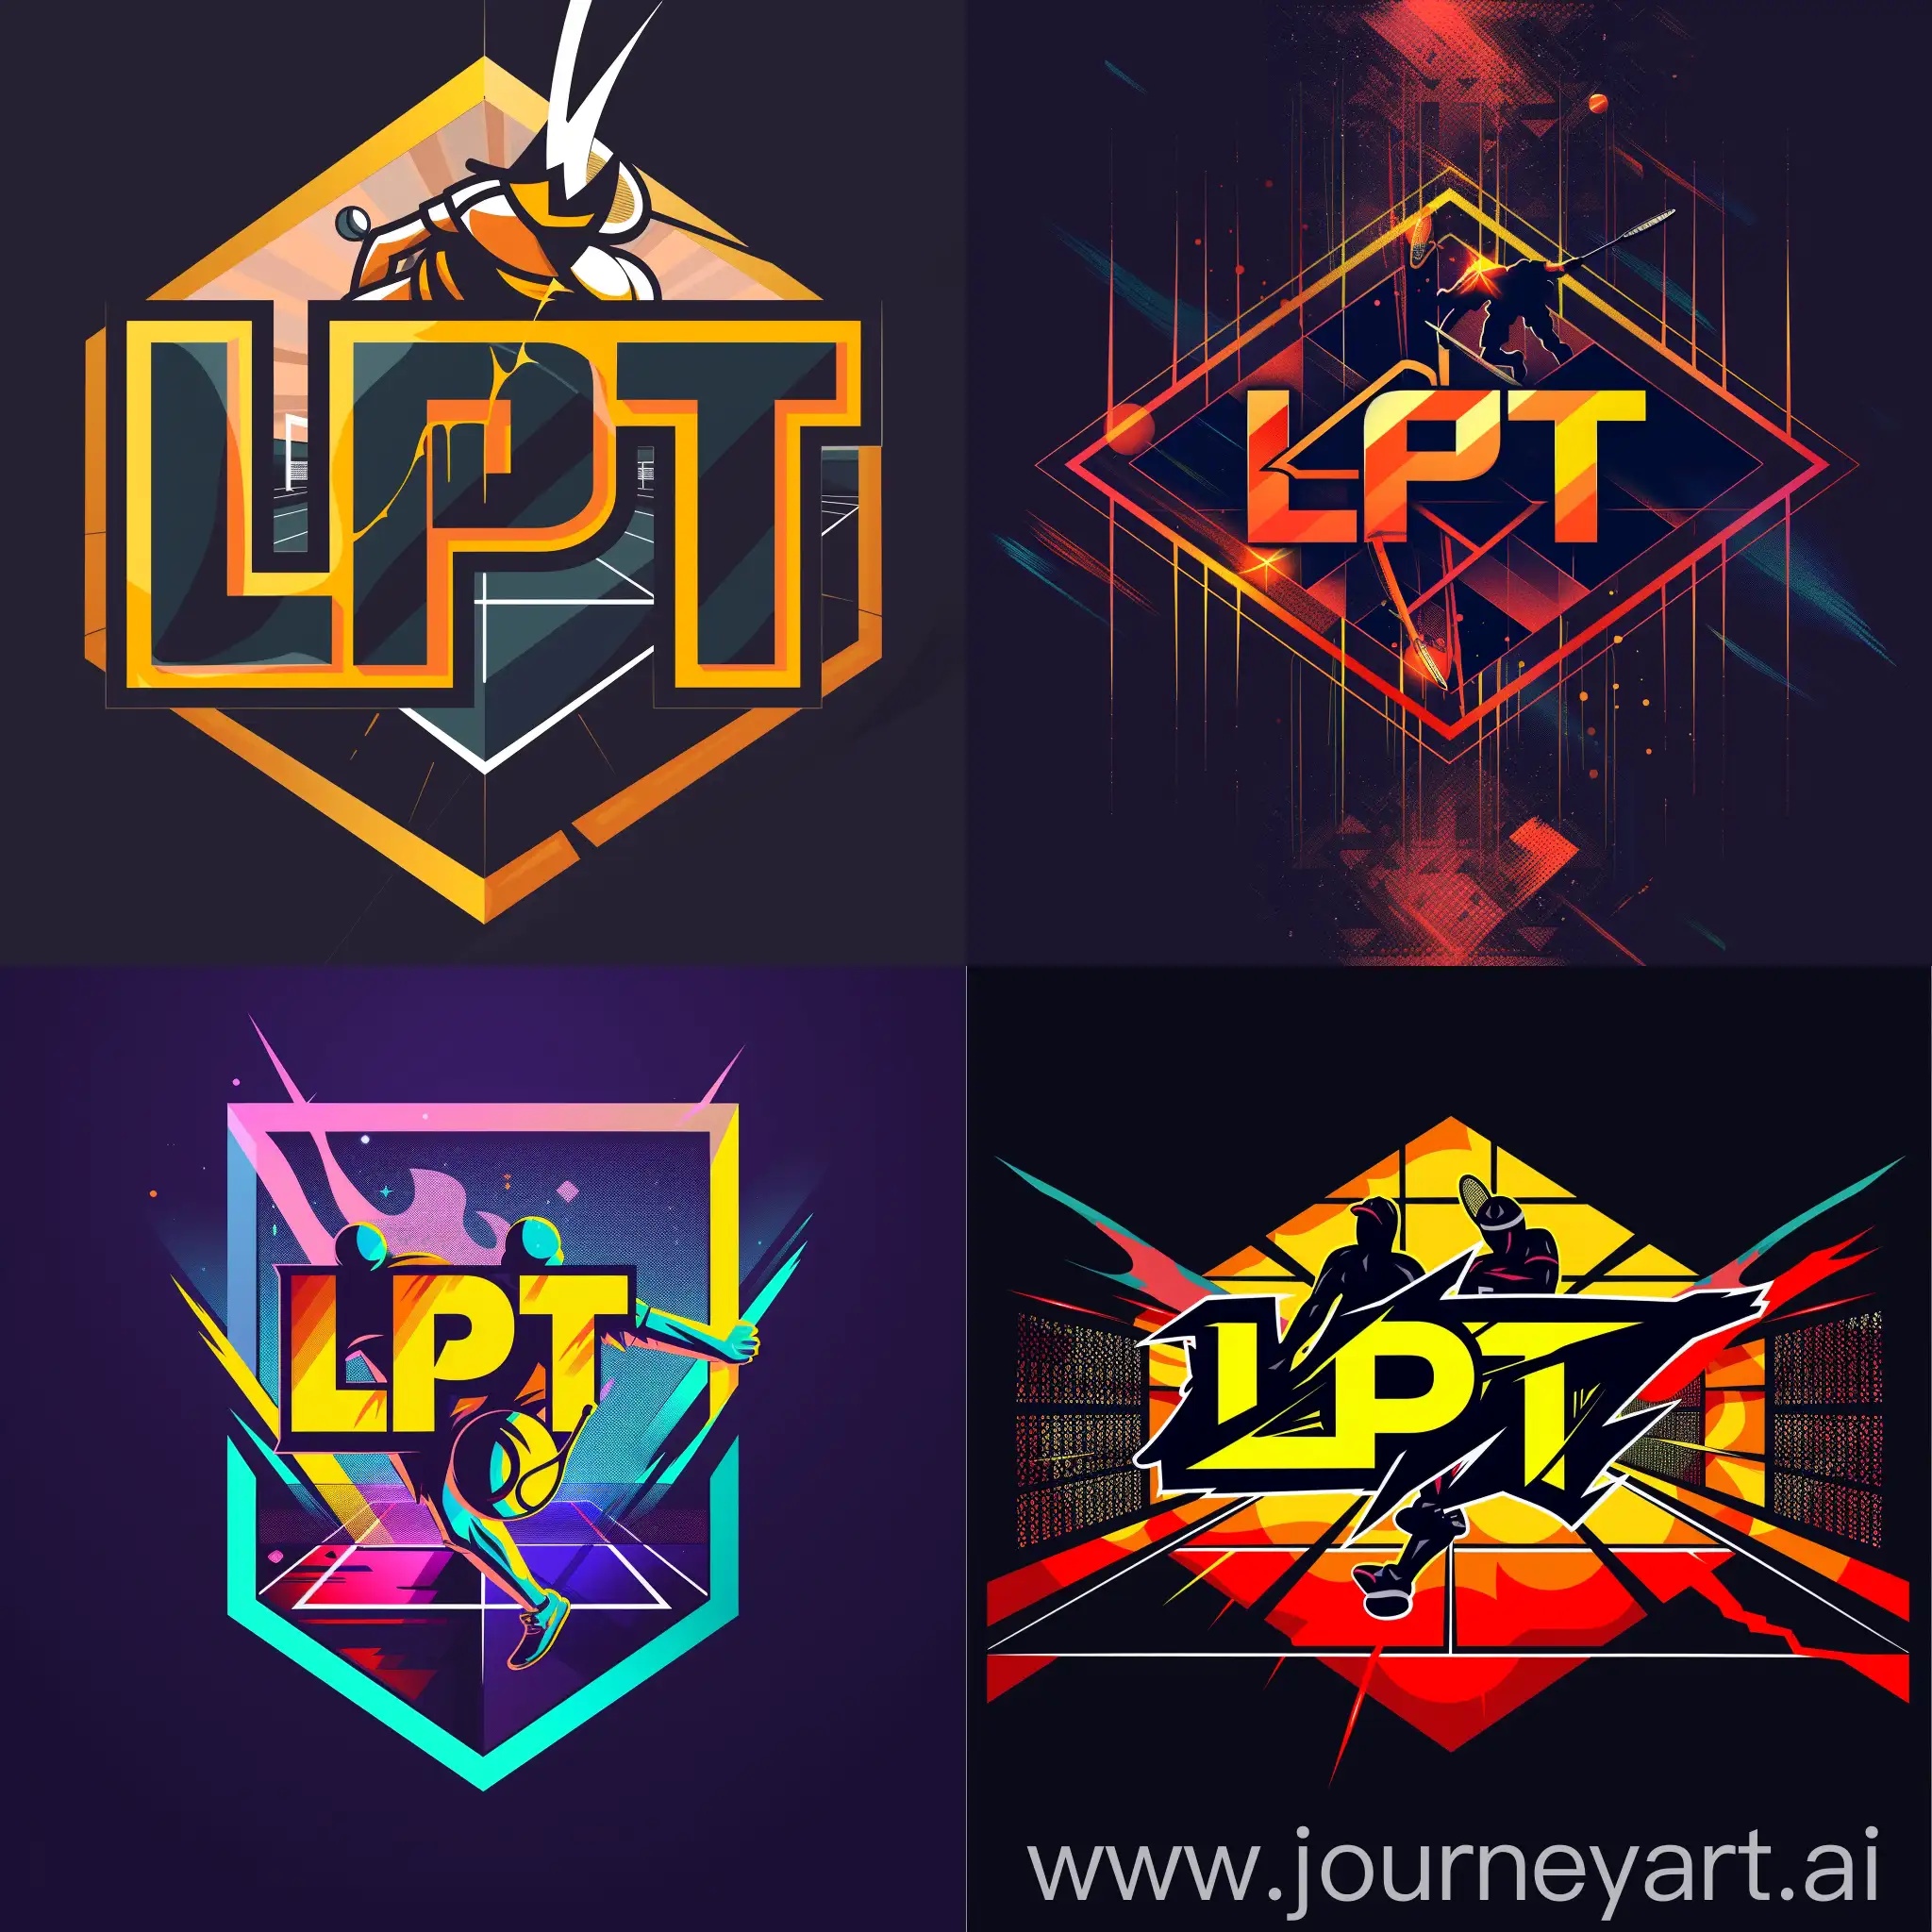 A sleek and modern logo design for a padel organization, featuring the acronym LPT prominently. The design is bold and eye-catching, with sharp lines and a vibrant color palette. In the background, there is a depiction of a padel court, with two players hitting padel balls back and forth. The overall feel of the image is energetic and dynamic, reflecting the fast-paced nature of the sport.